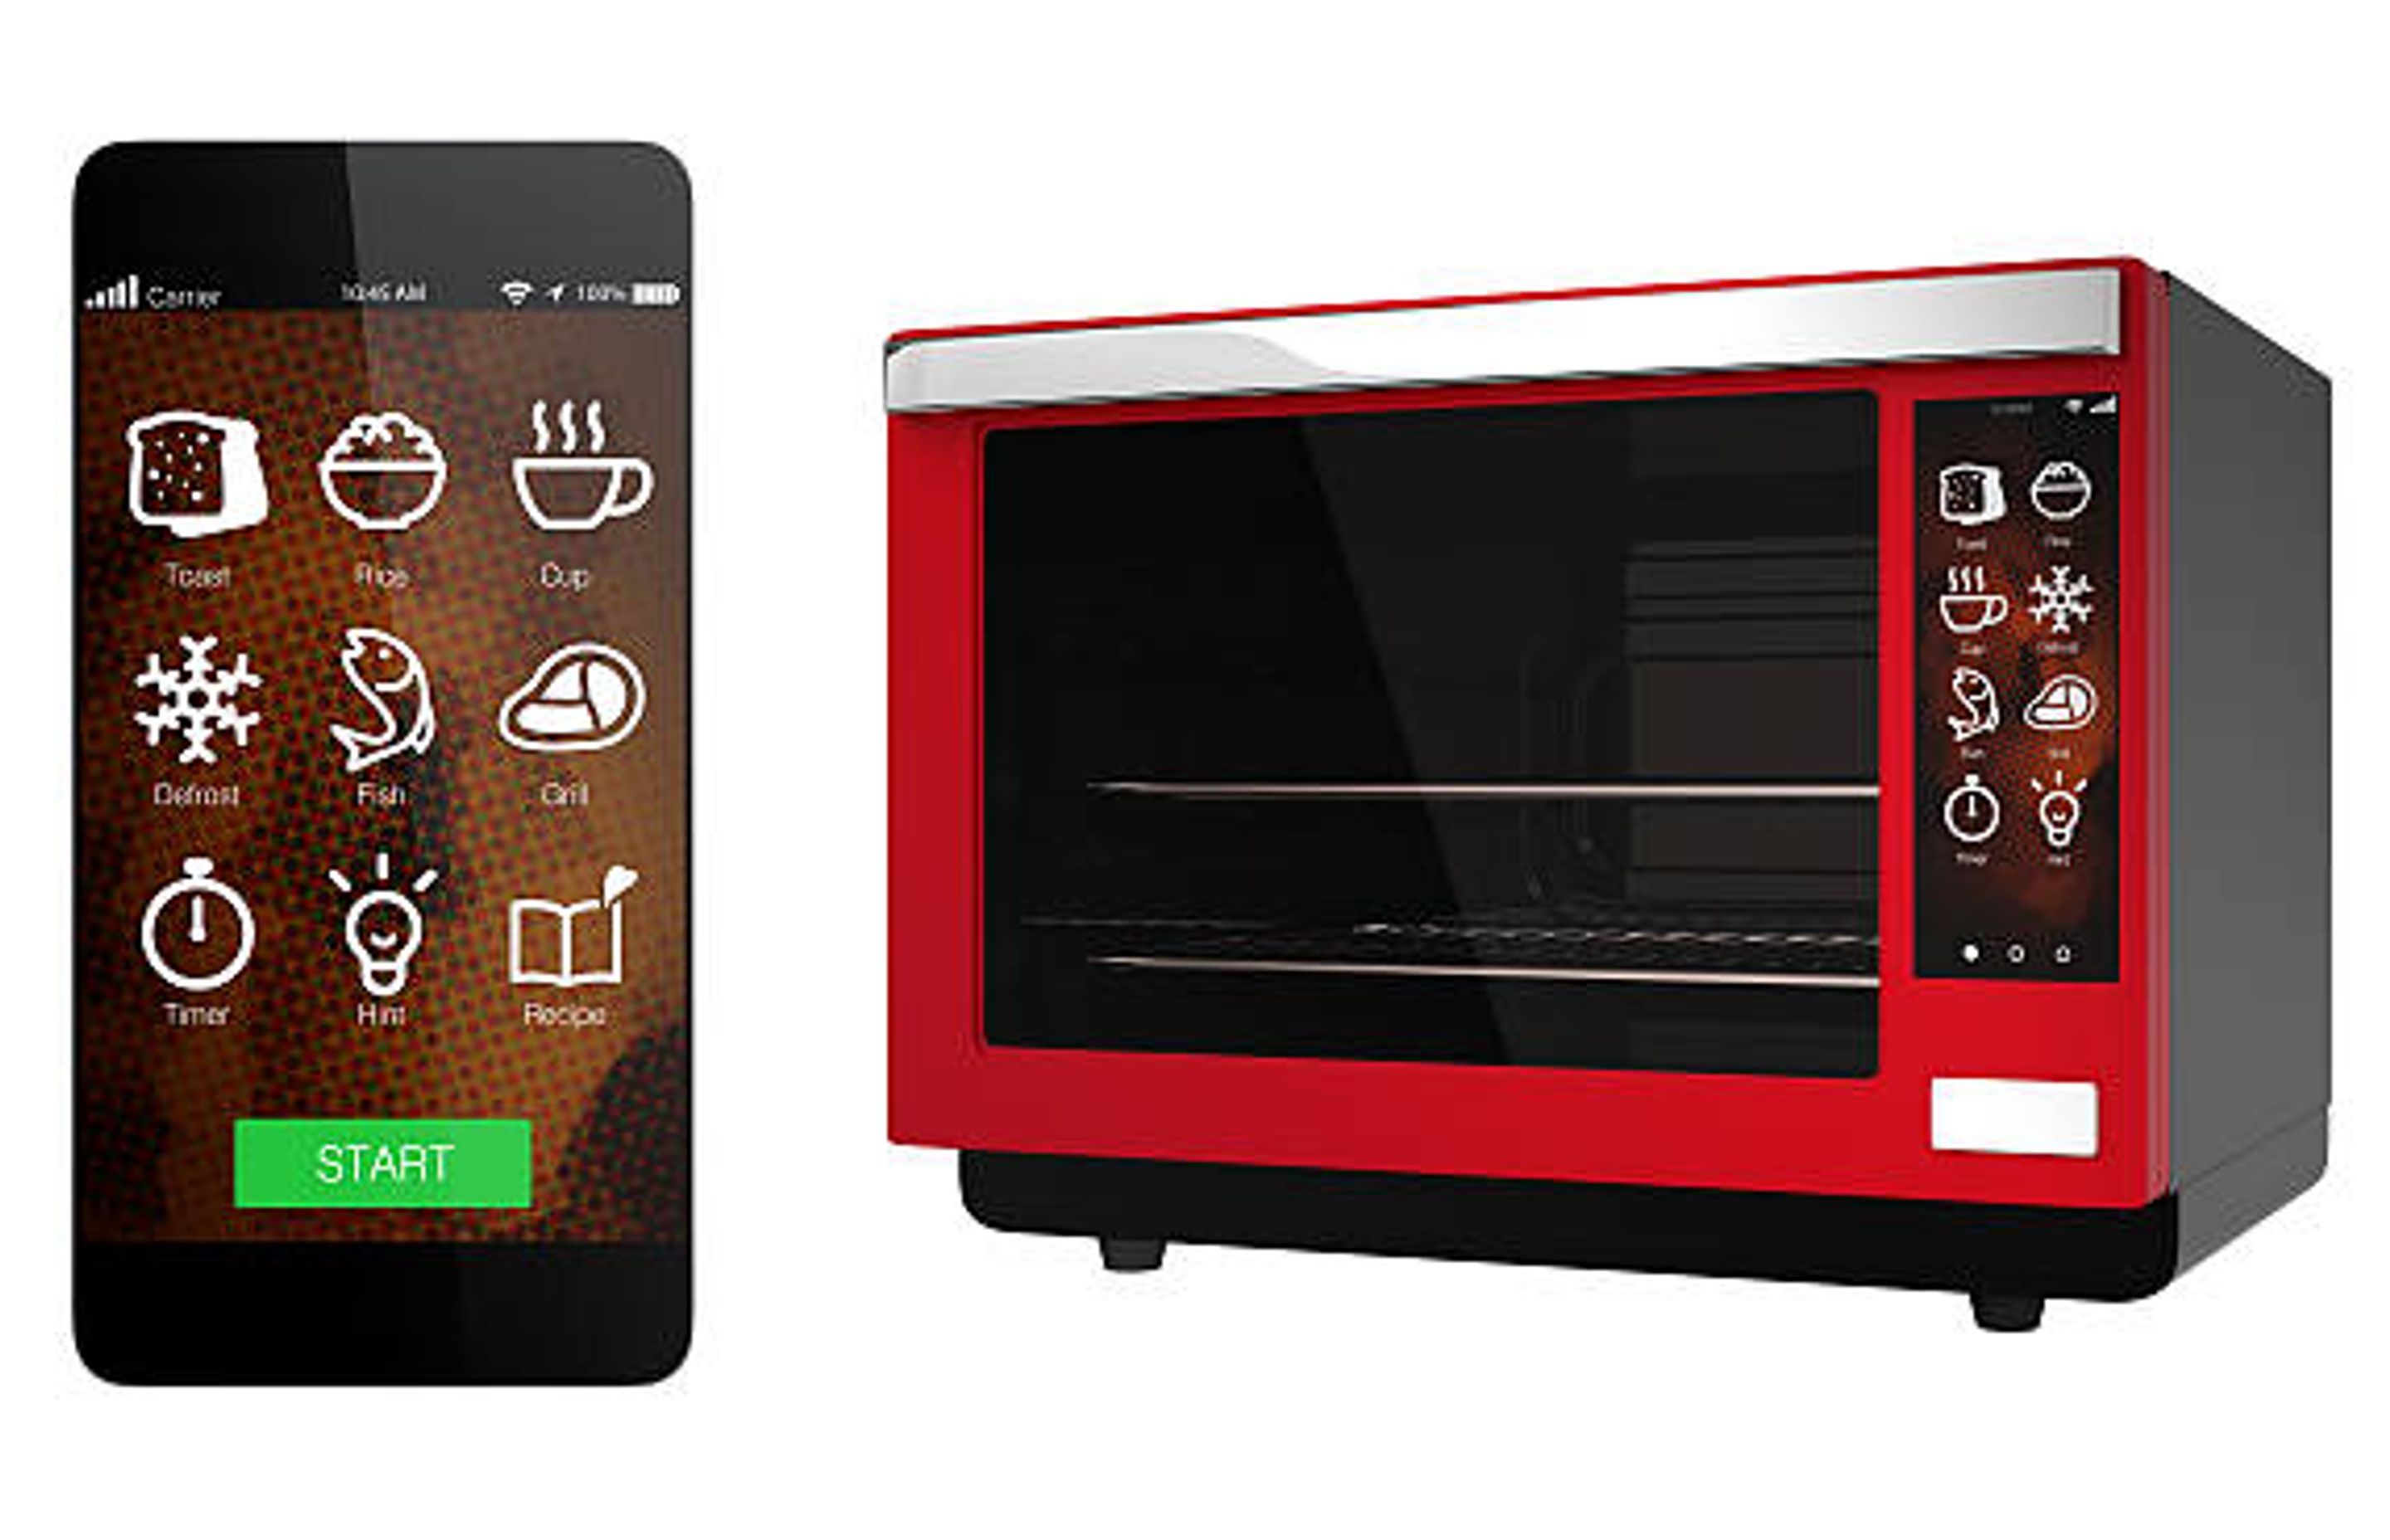 Example of a small smart oven | Photo Credit – iStock